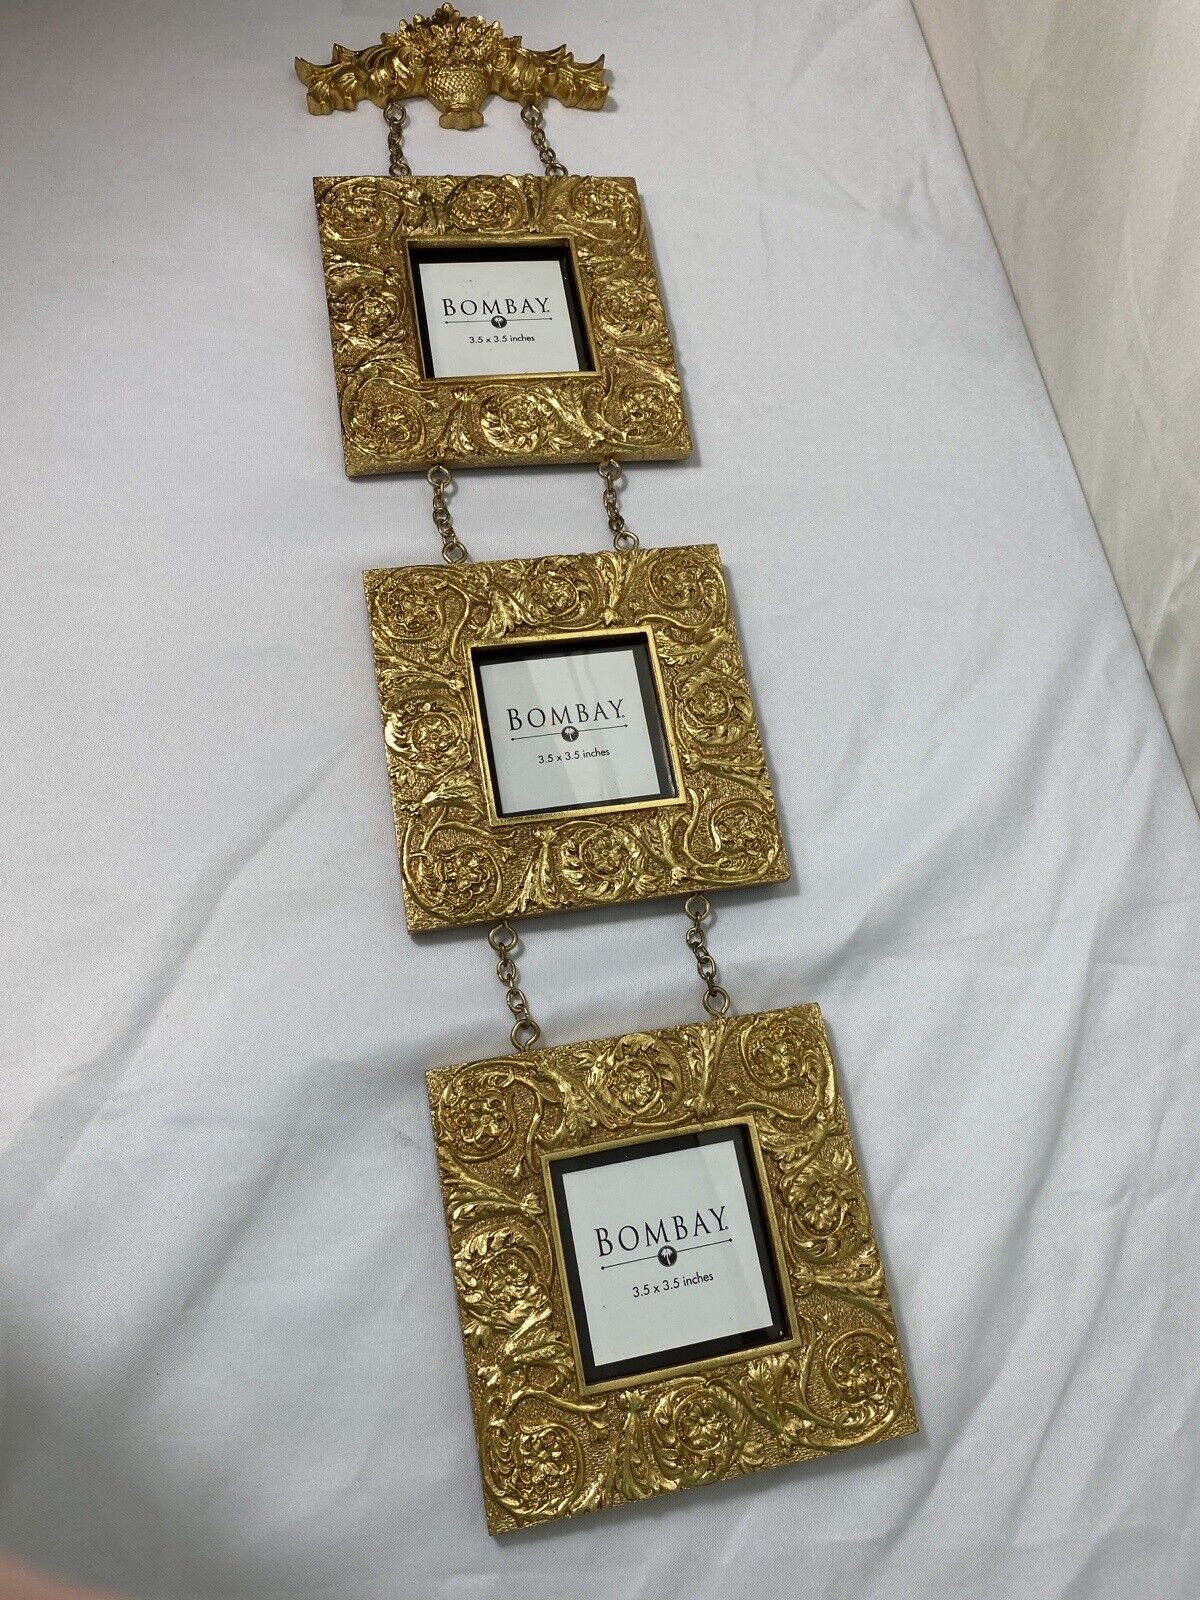 Bombay Picture Frames Gold Decorative Scrolled Triple Hanging Trio New 3.5X3.5